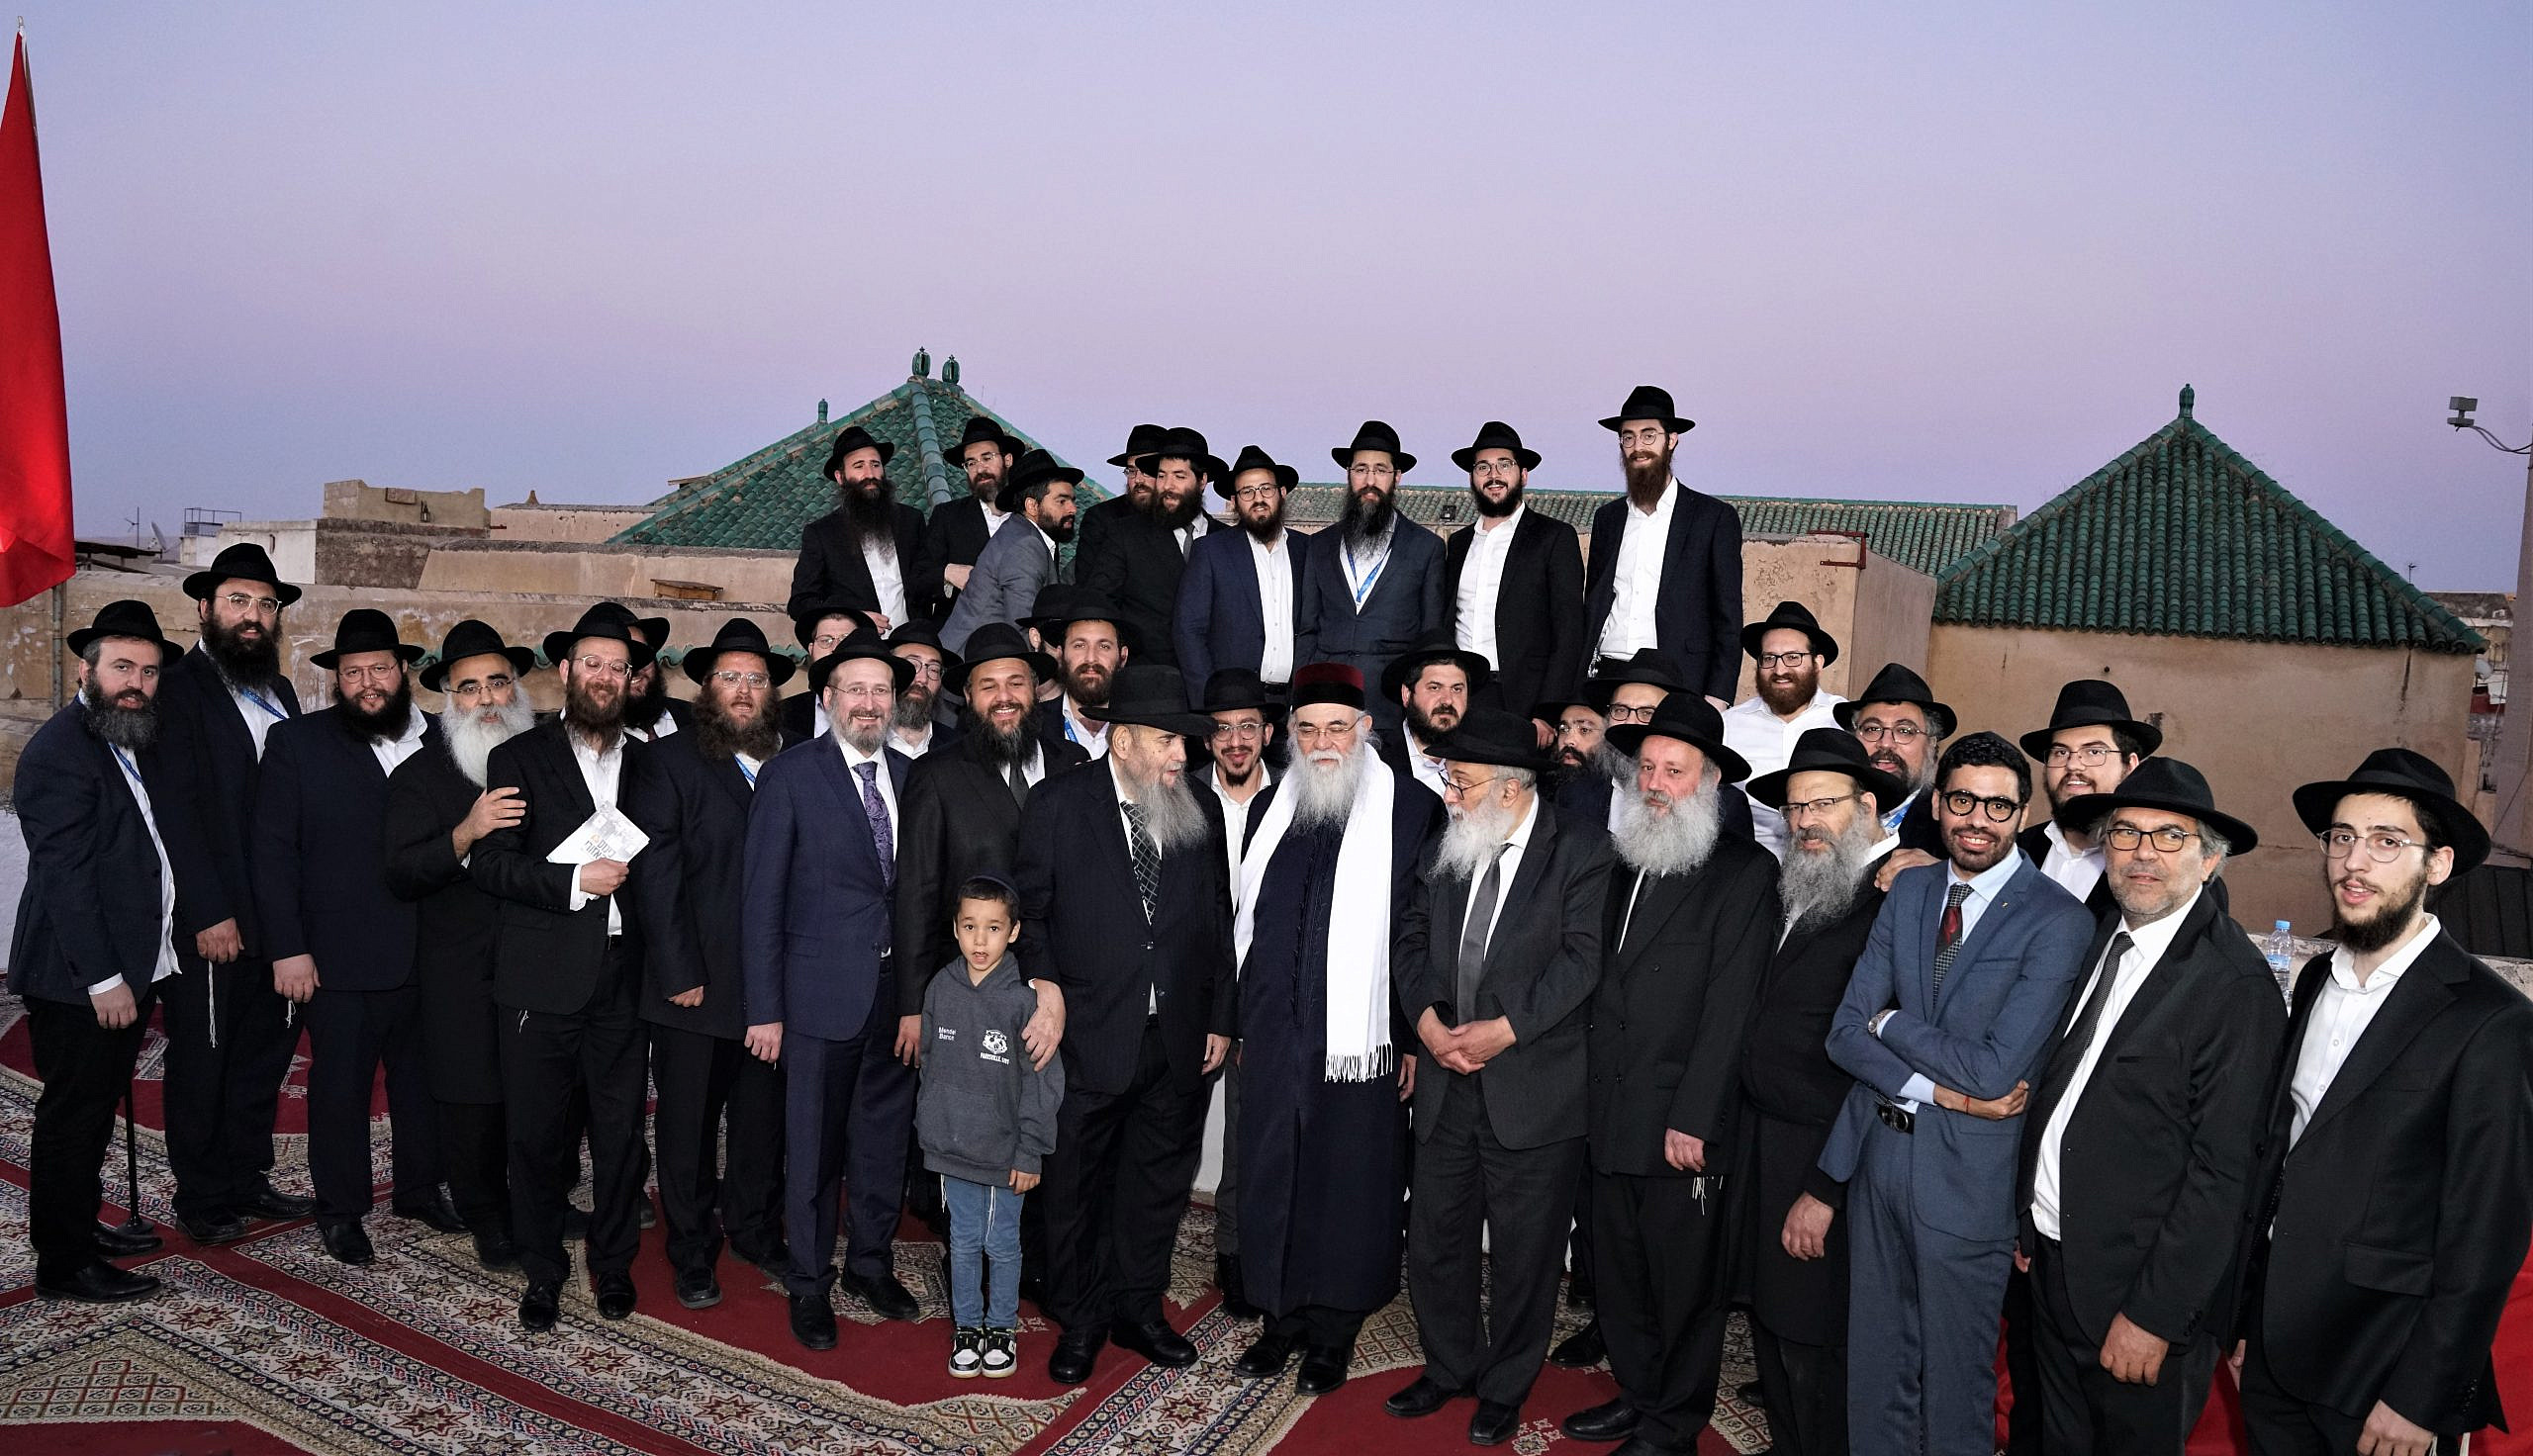 Chabad Lubavitch Rabbis From 40 Countries Convene For Conference In